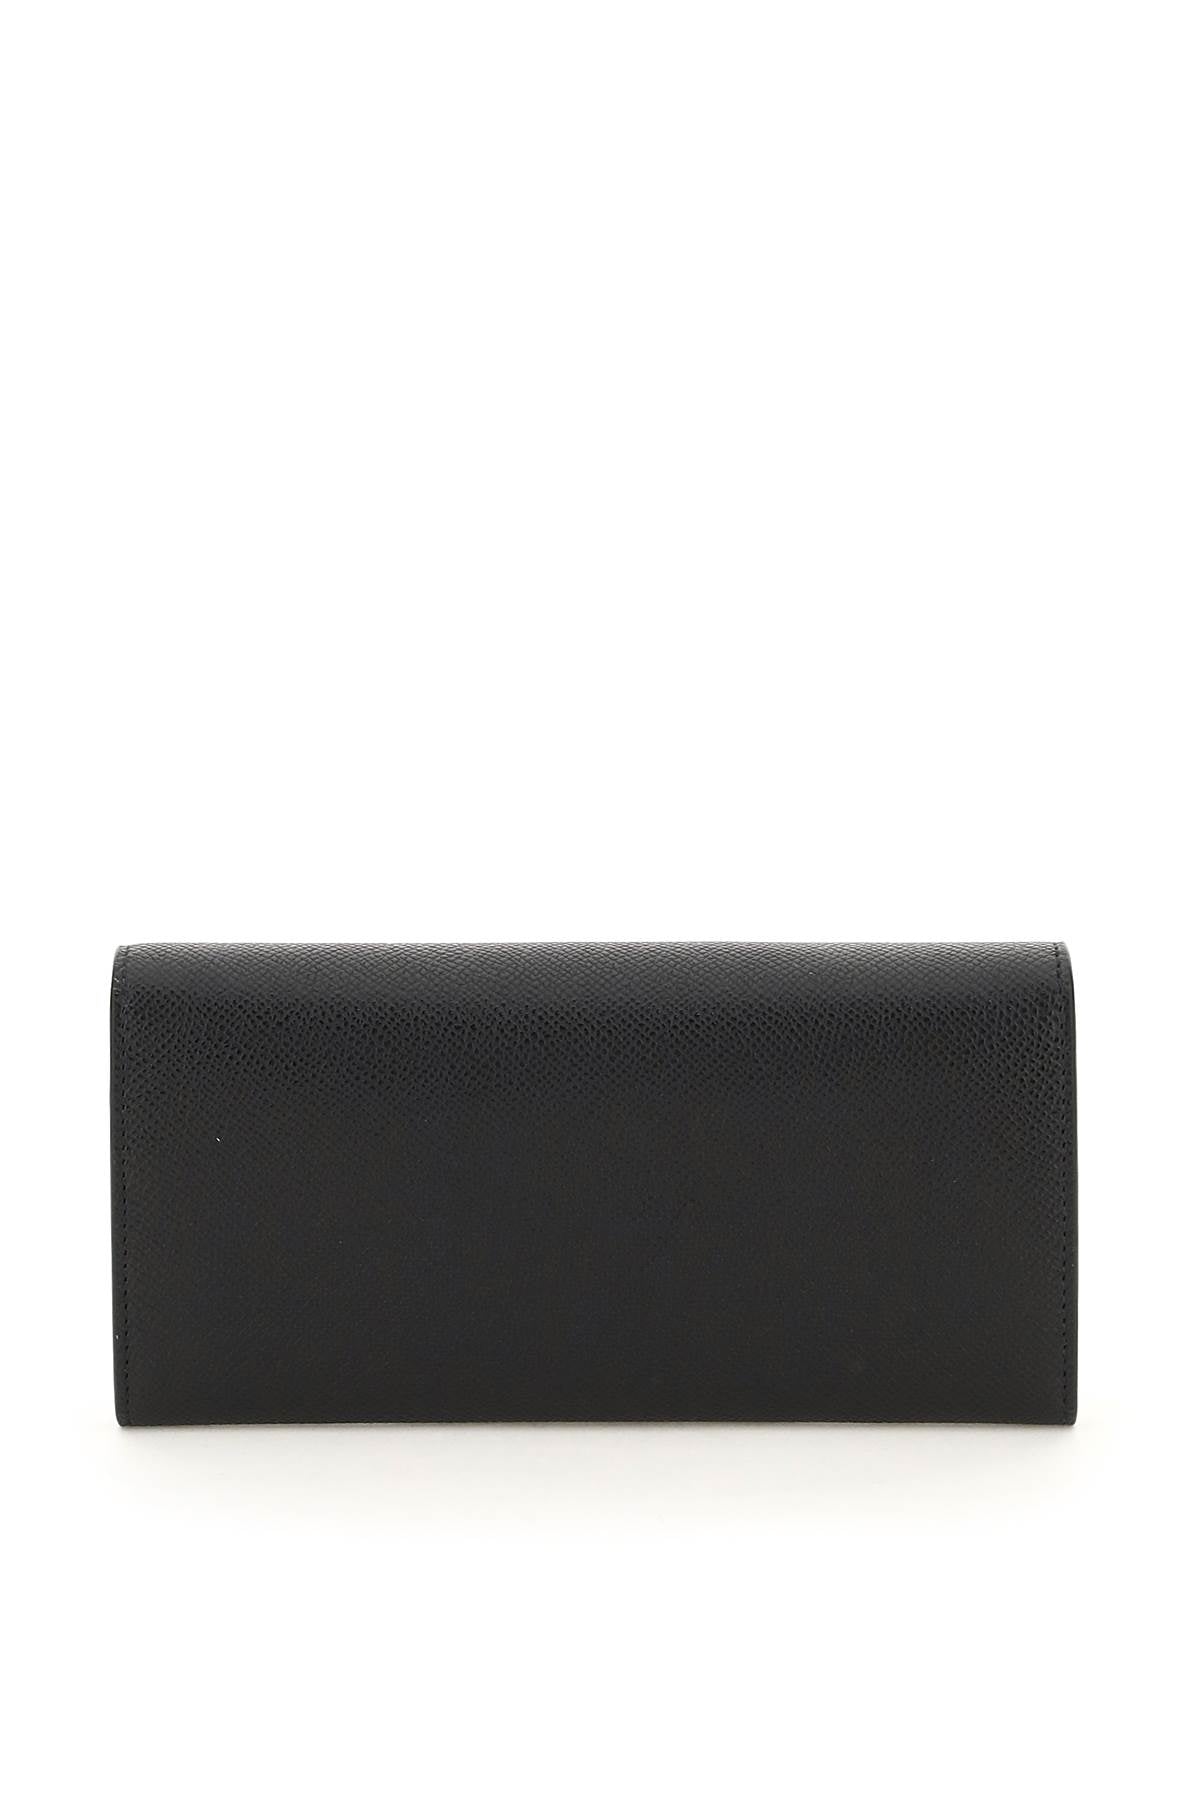 FERRAGAMO Gancini Hook Continental Wallet in Grained Leather with Clip Closure and Central Zipper Pocket